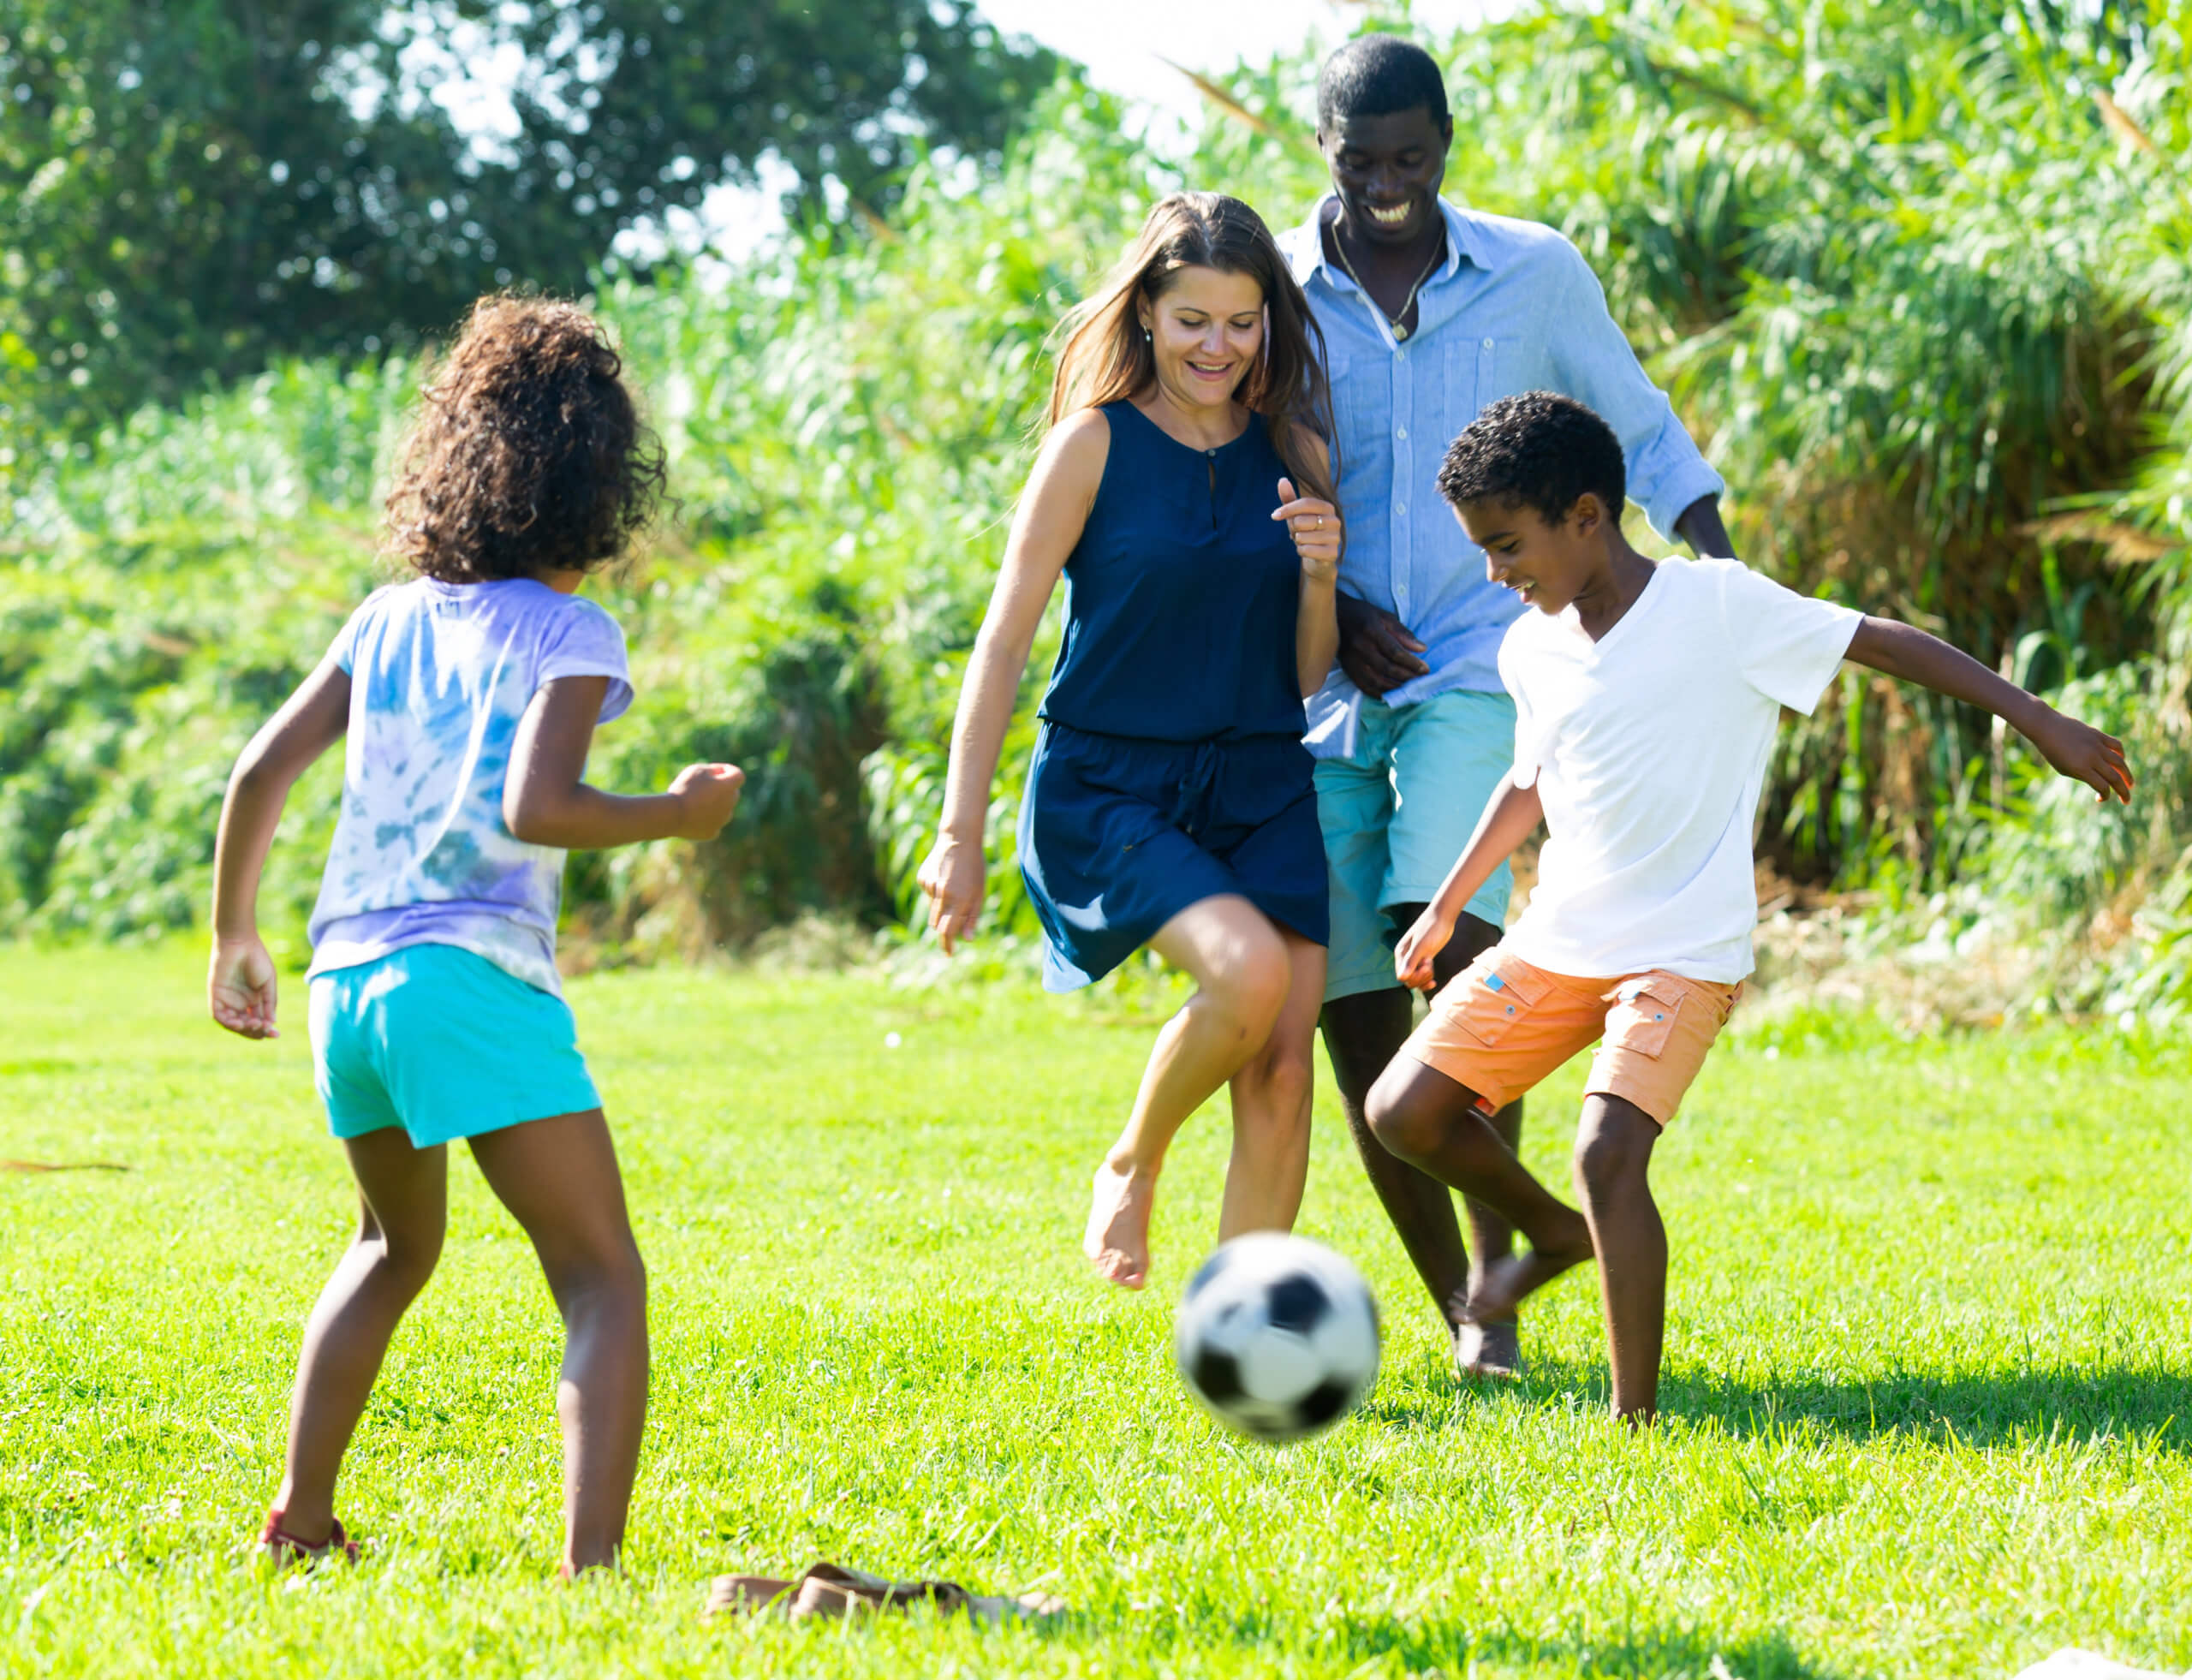 A young family of two parents and two children kick around a soccer ball outside.